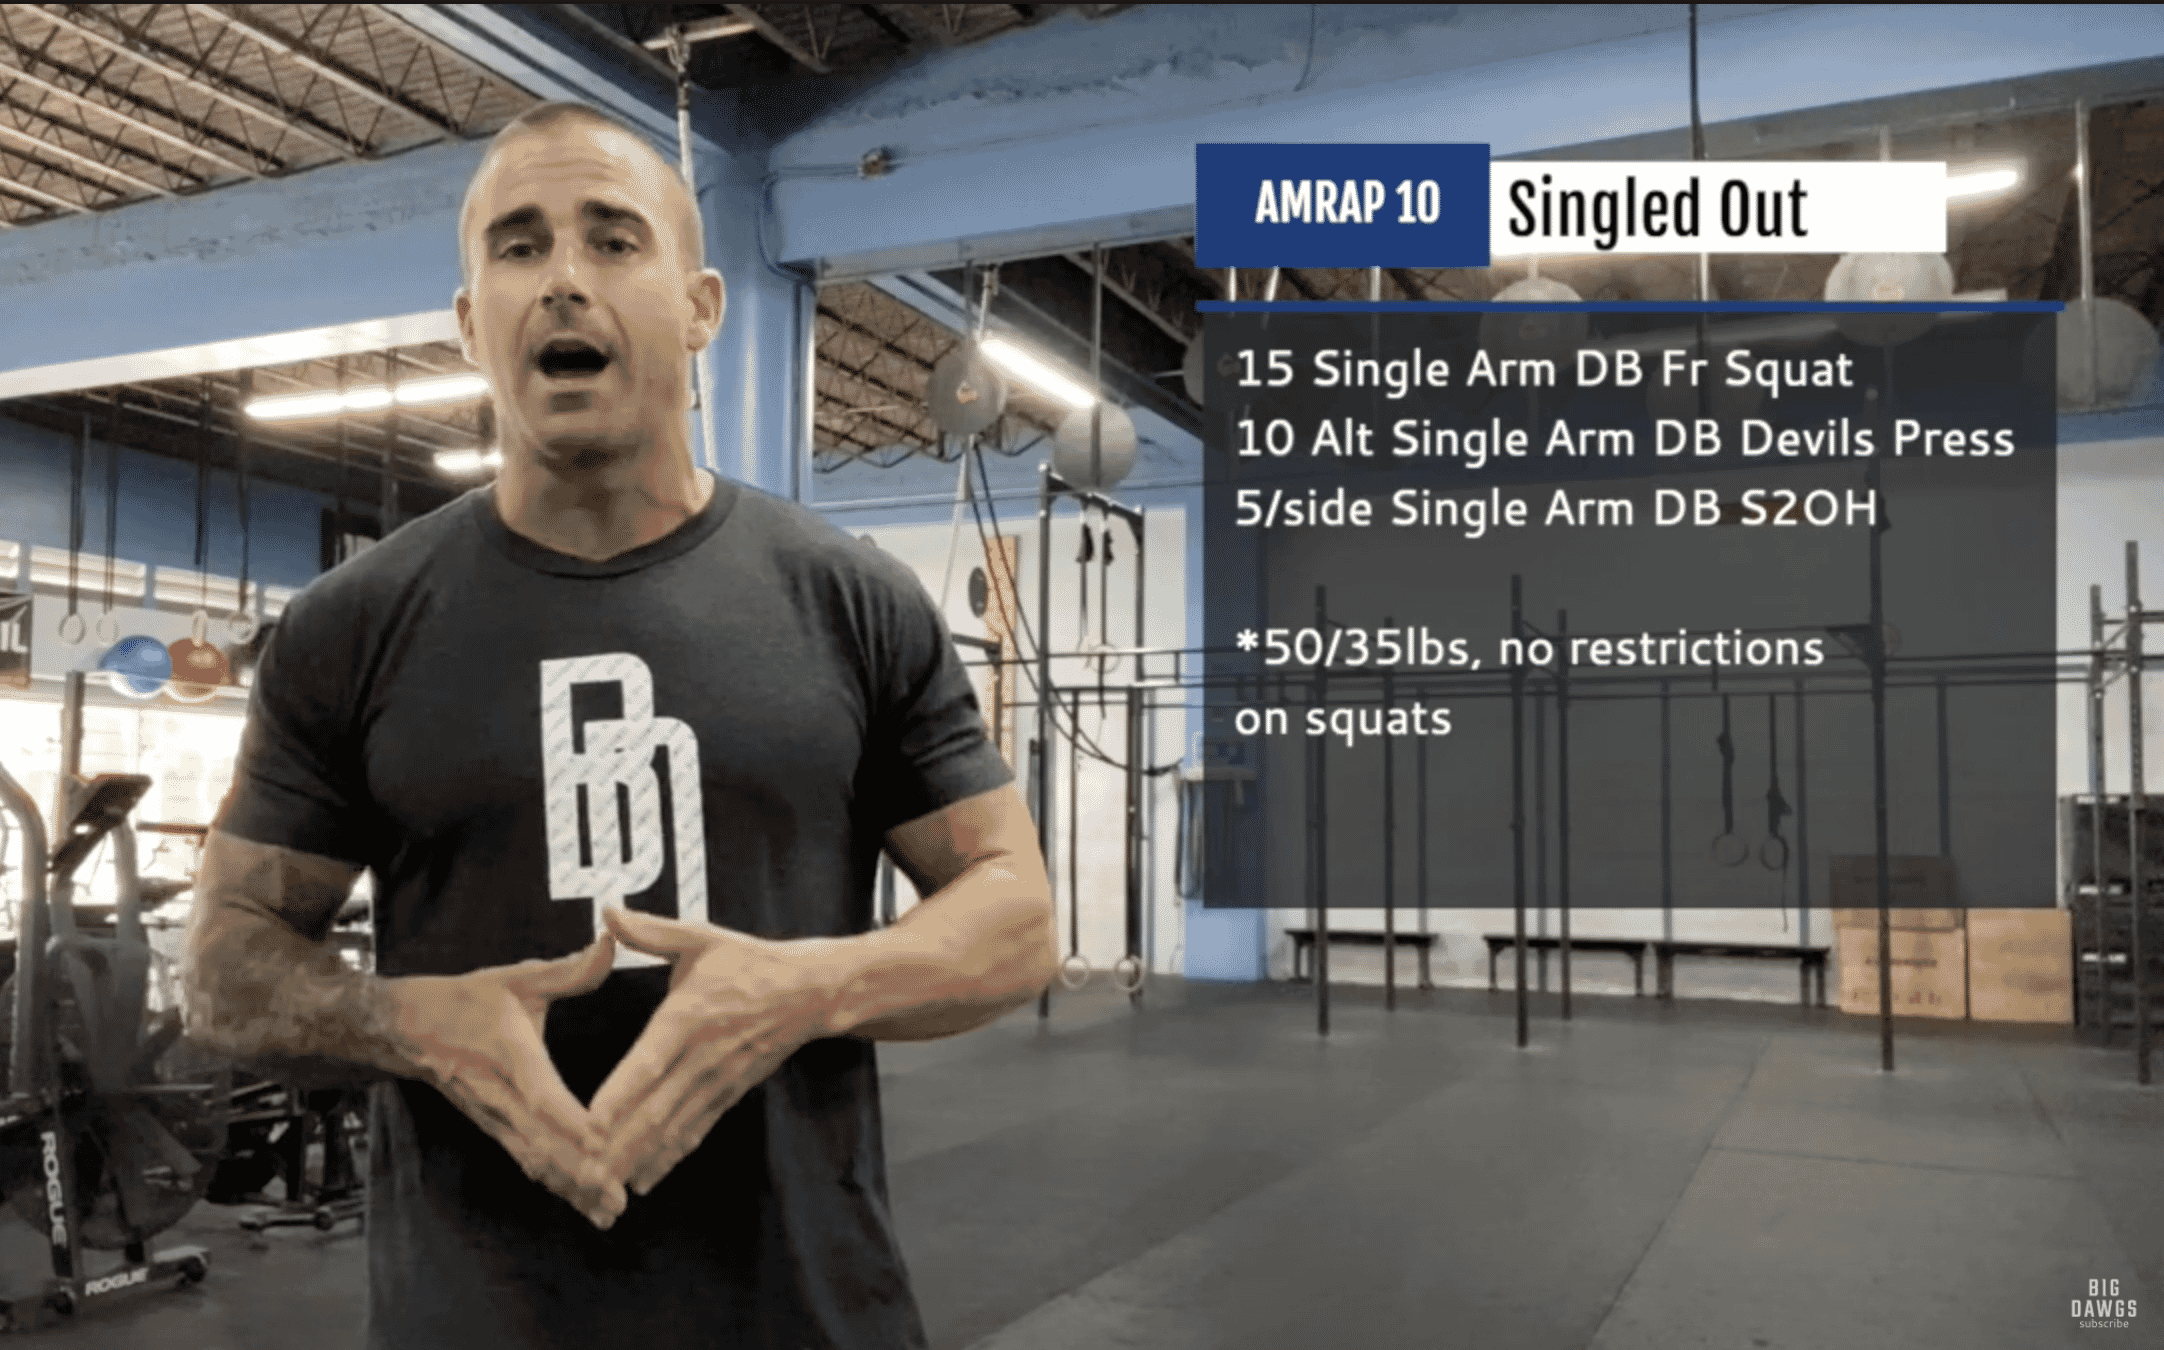 February Monthly Workout- "Singled Out"